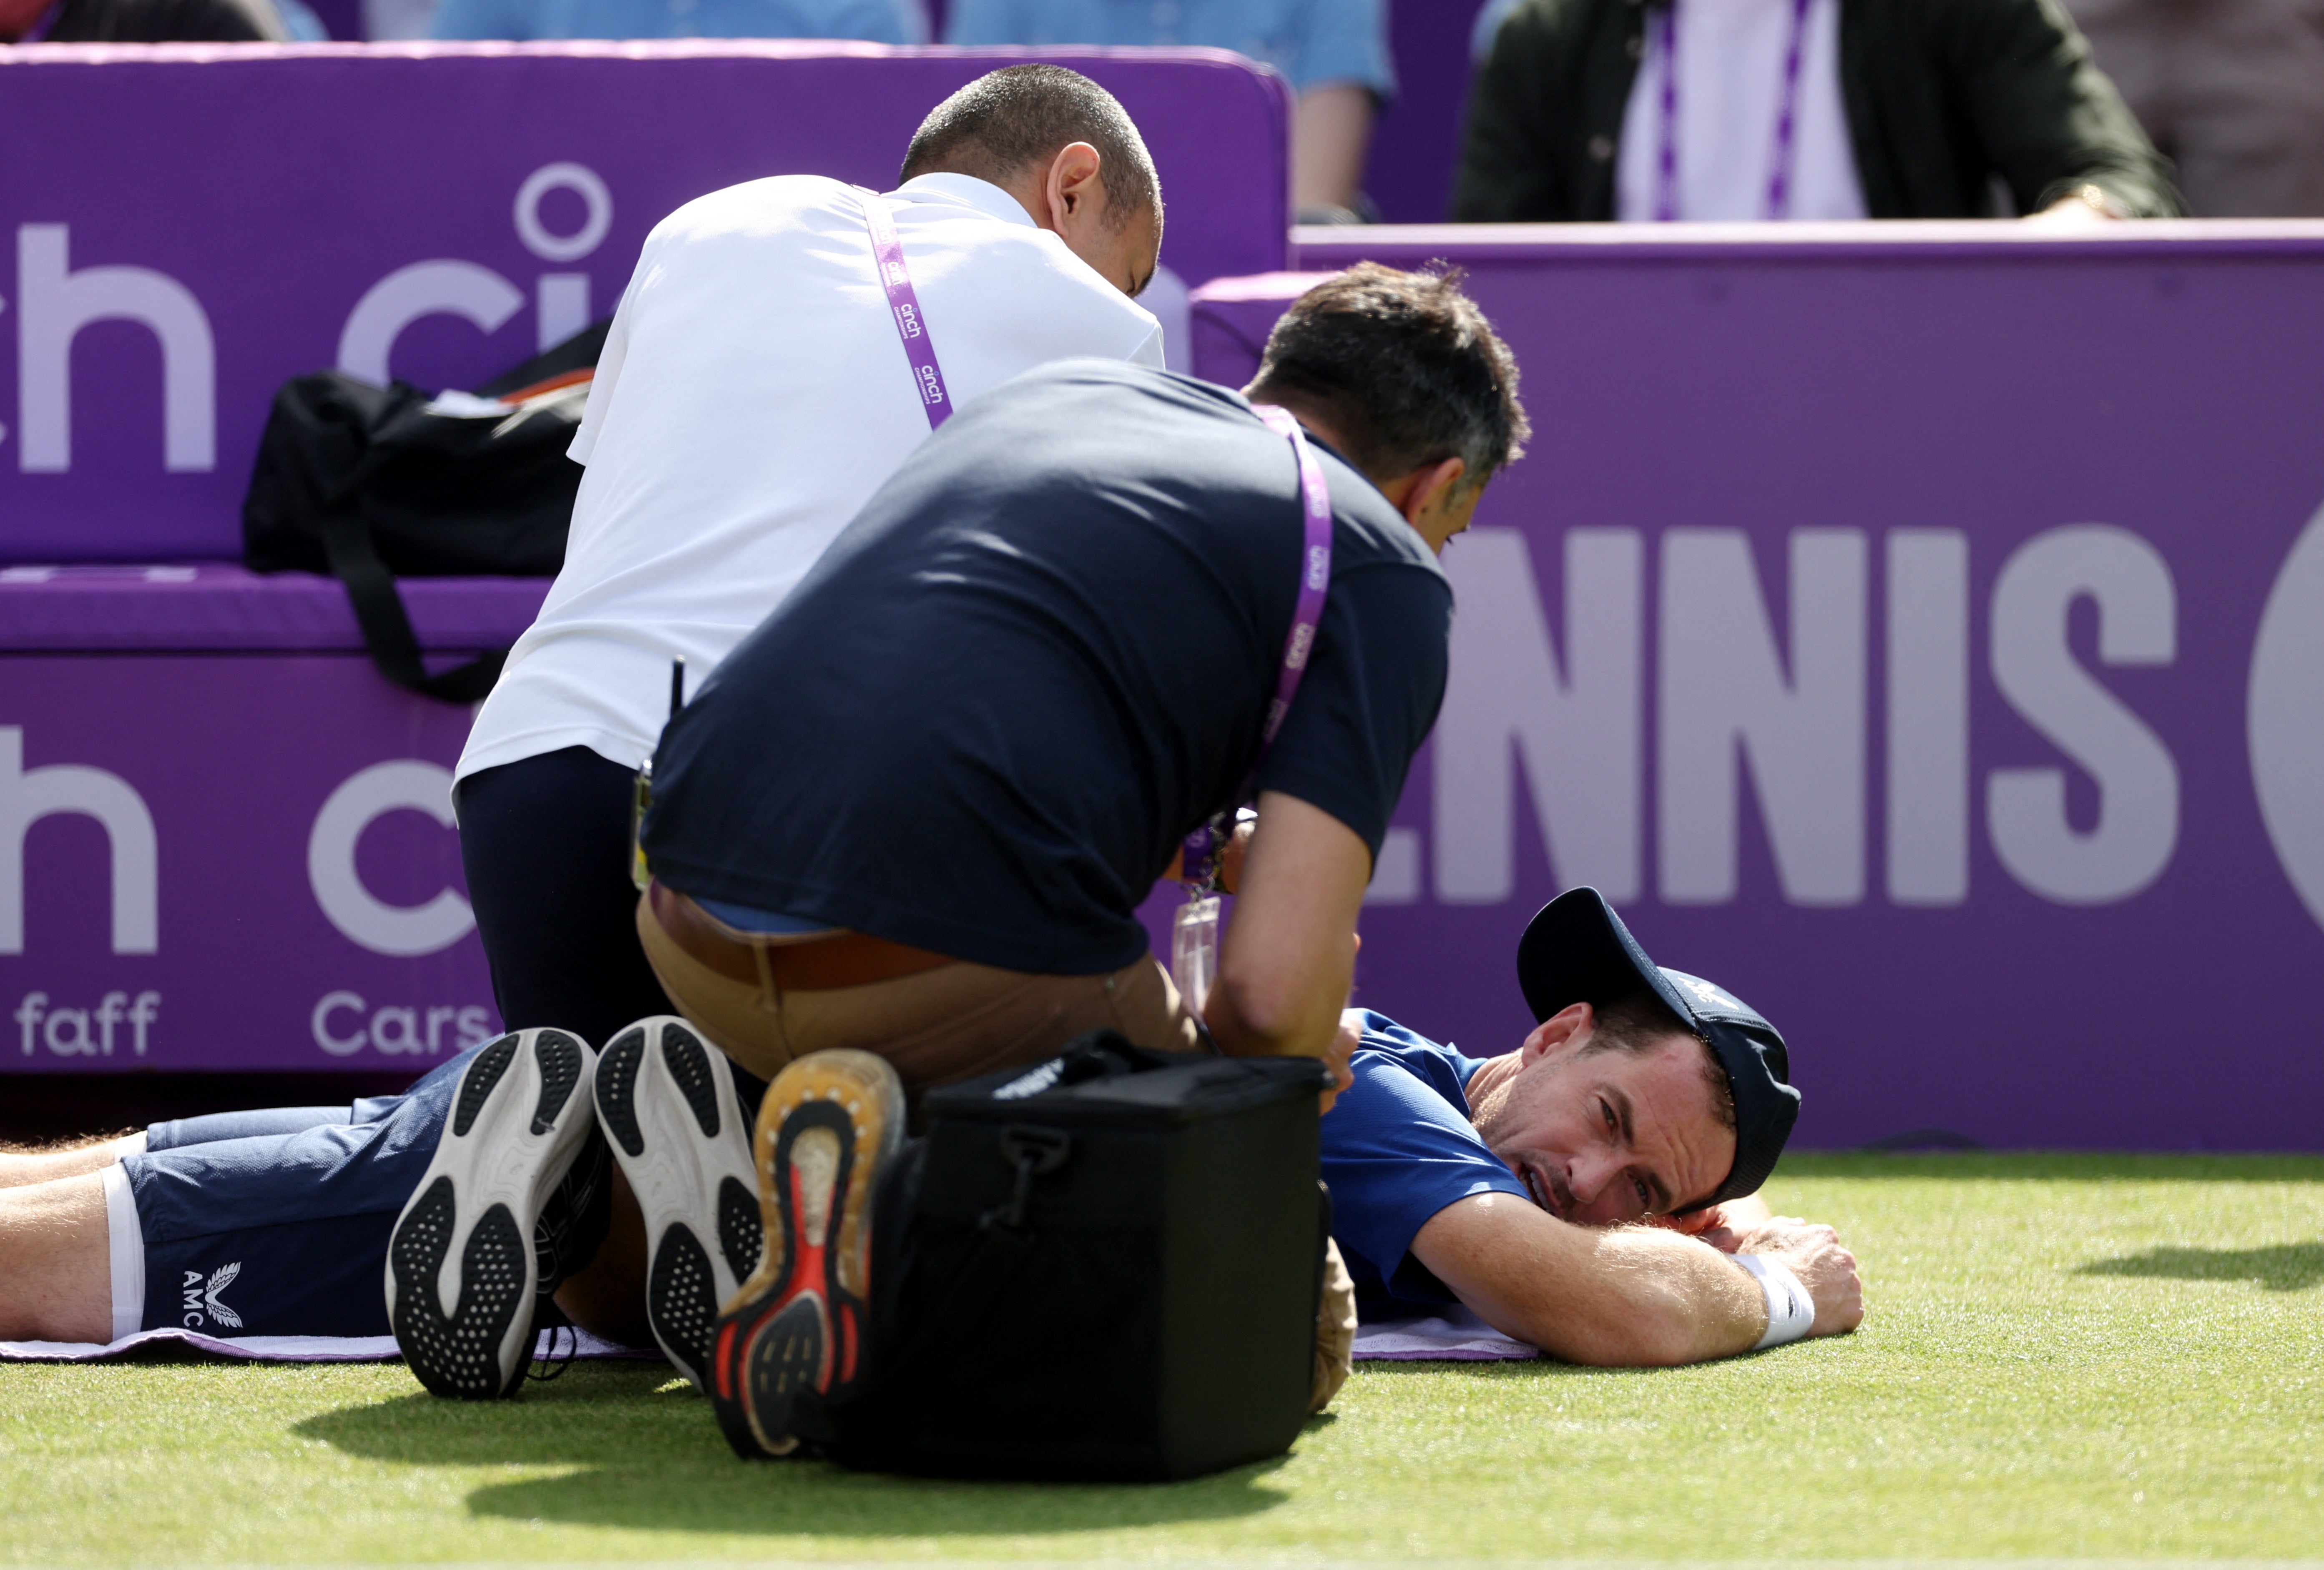 Murray retired from his second-round match at Queen’s on Wednesday due to a back injury